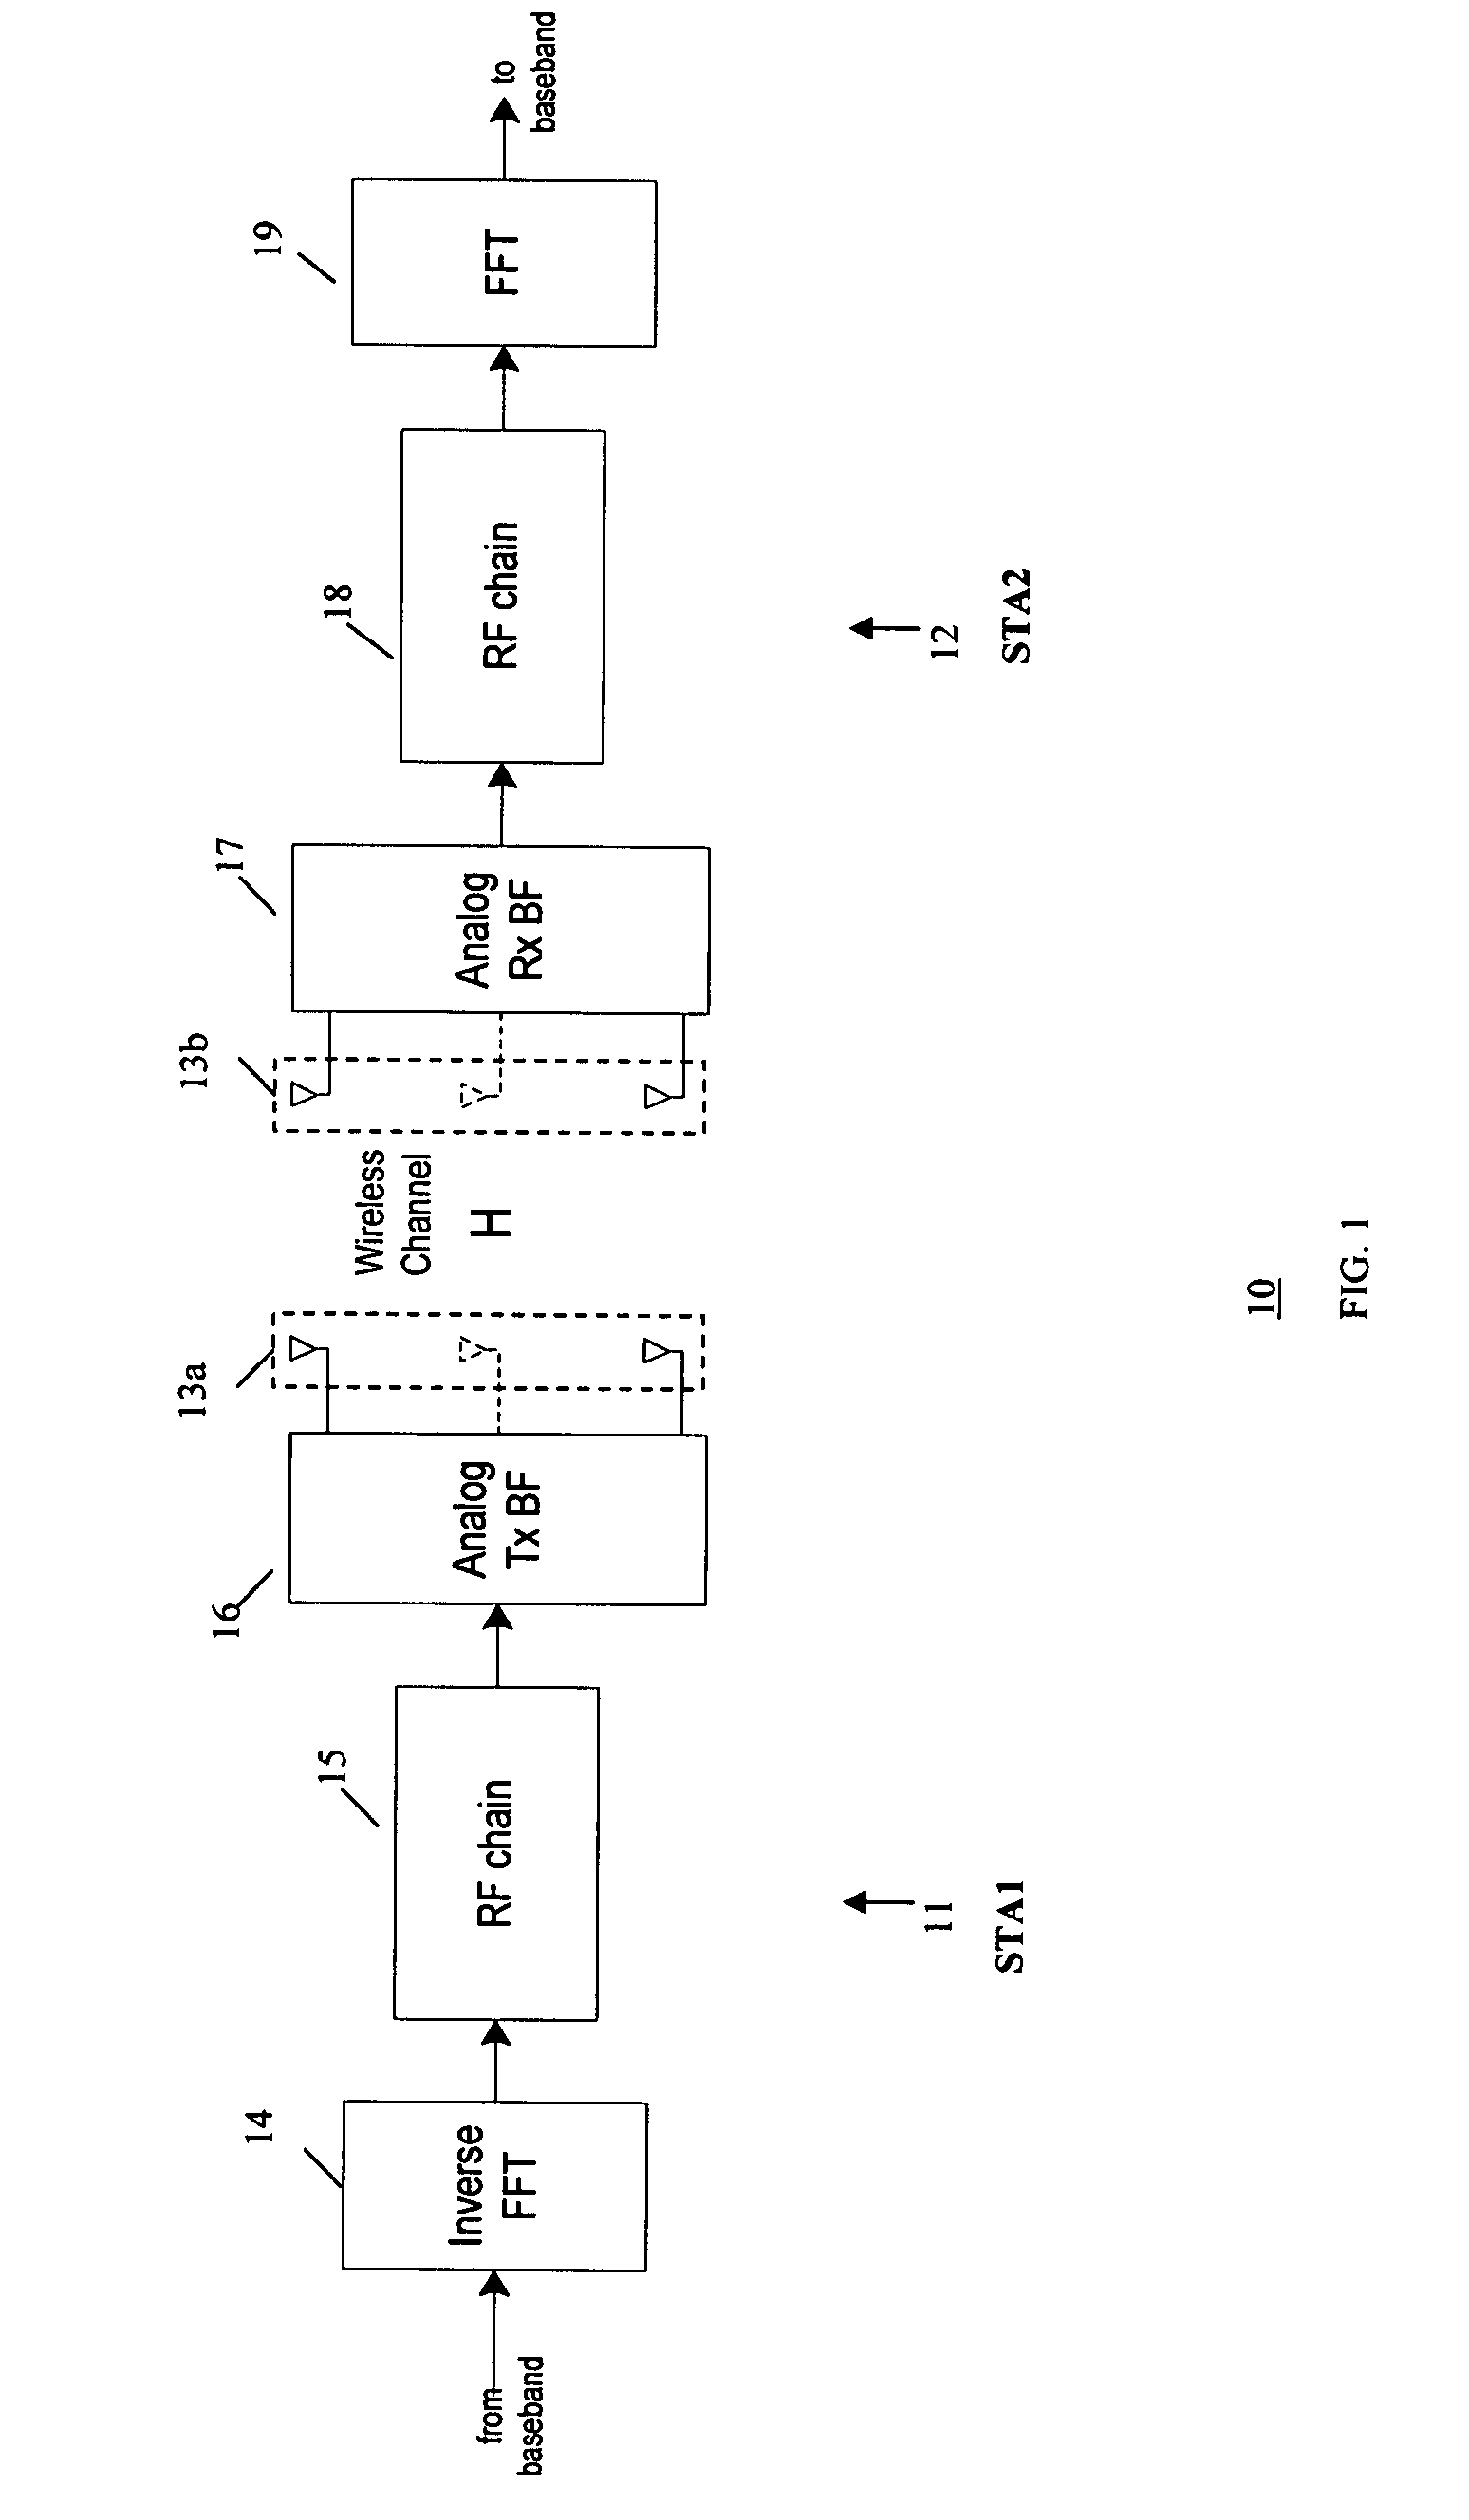 Method and system for analog beamforming in wireless communication systems